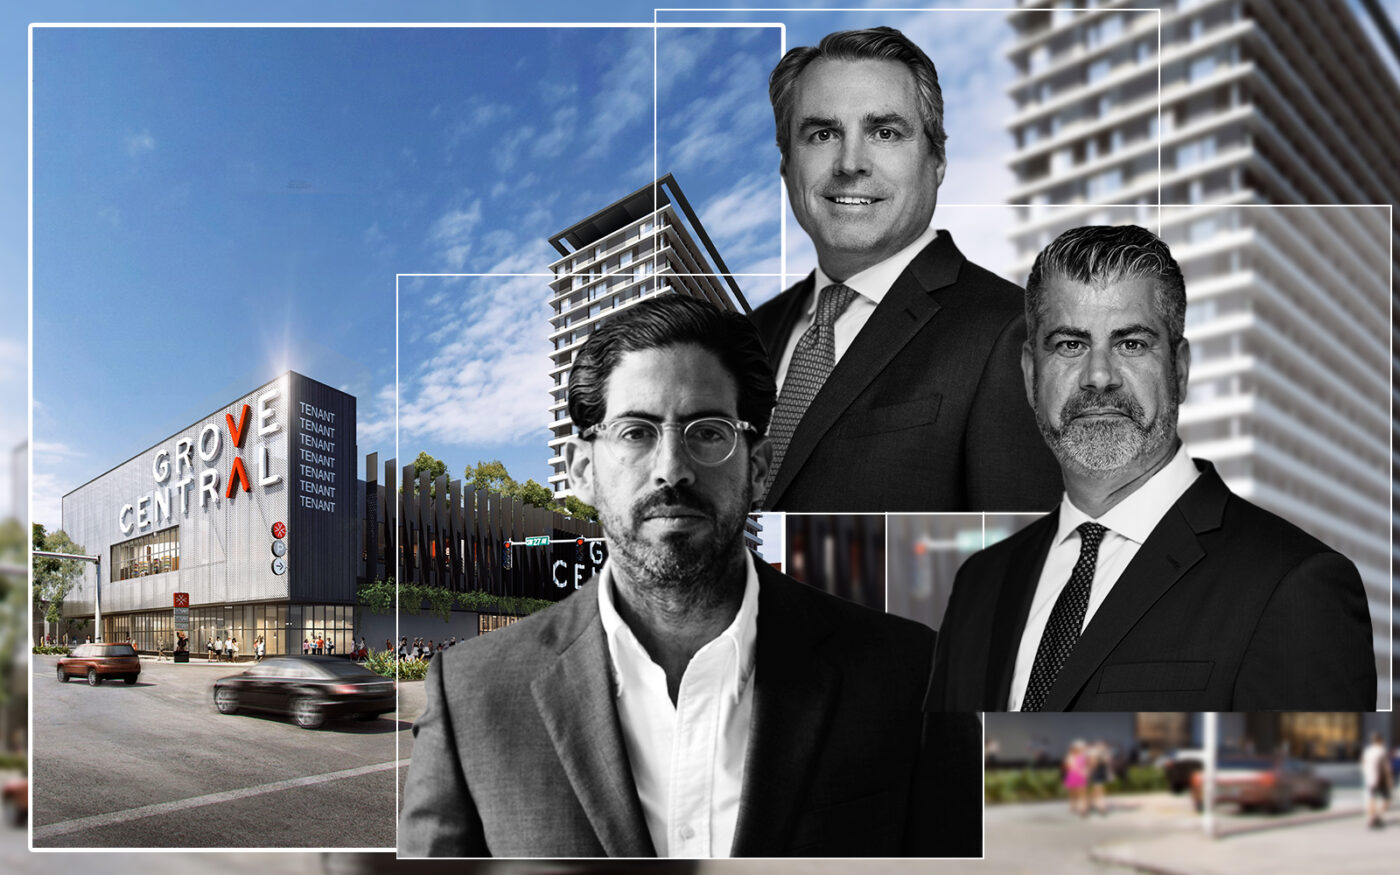 Render of Grove Central project in Miami with Grove Central developers David Martin of Terra, and Justin Kennedy and Peter LaPointe of Grass River Property